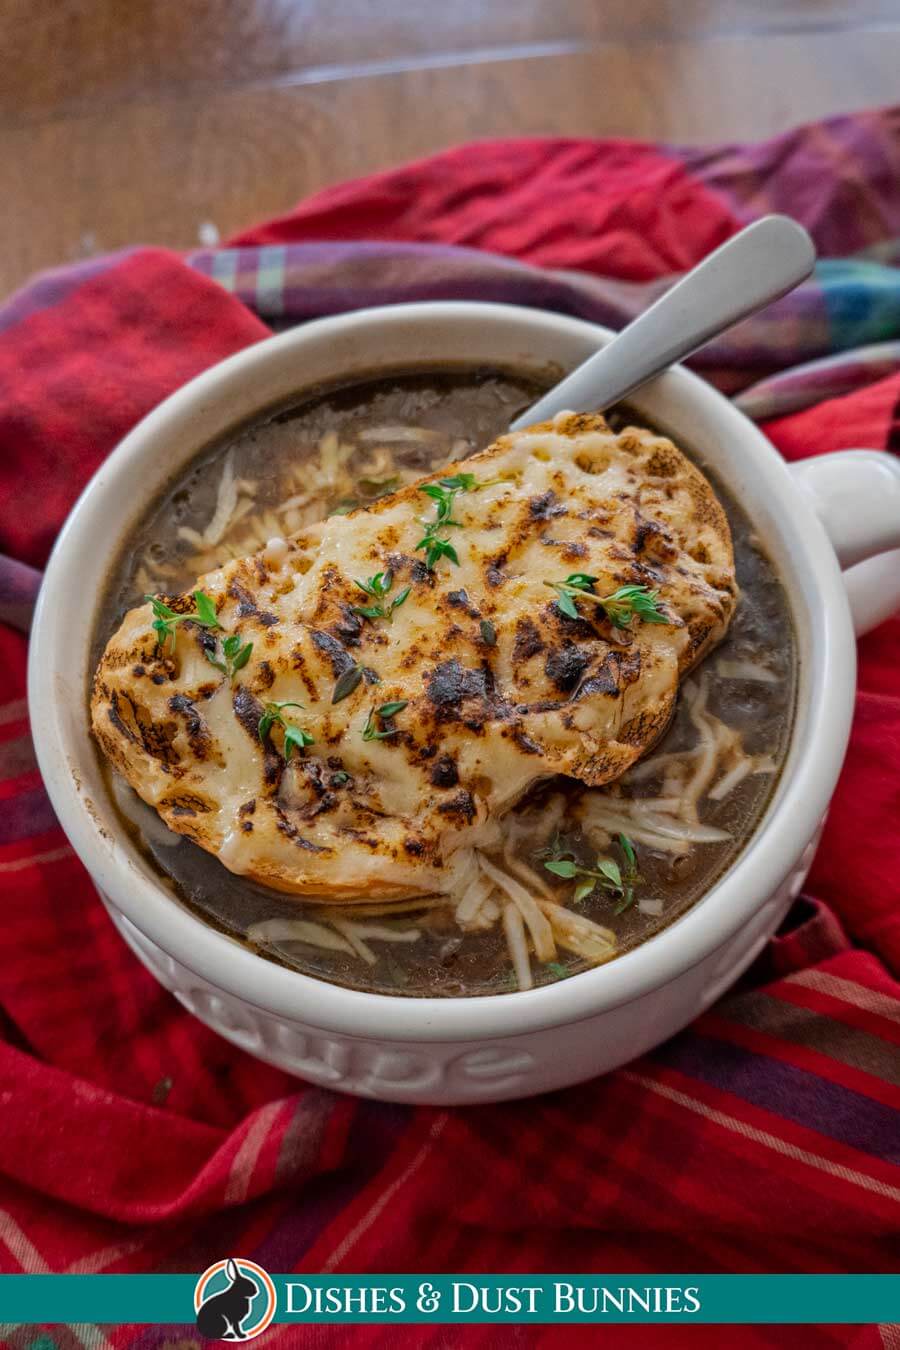 Classic French Onion Soup